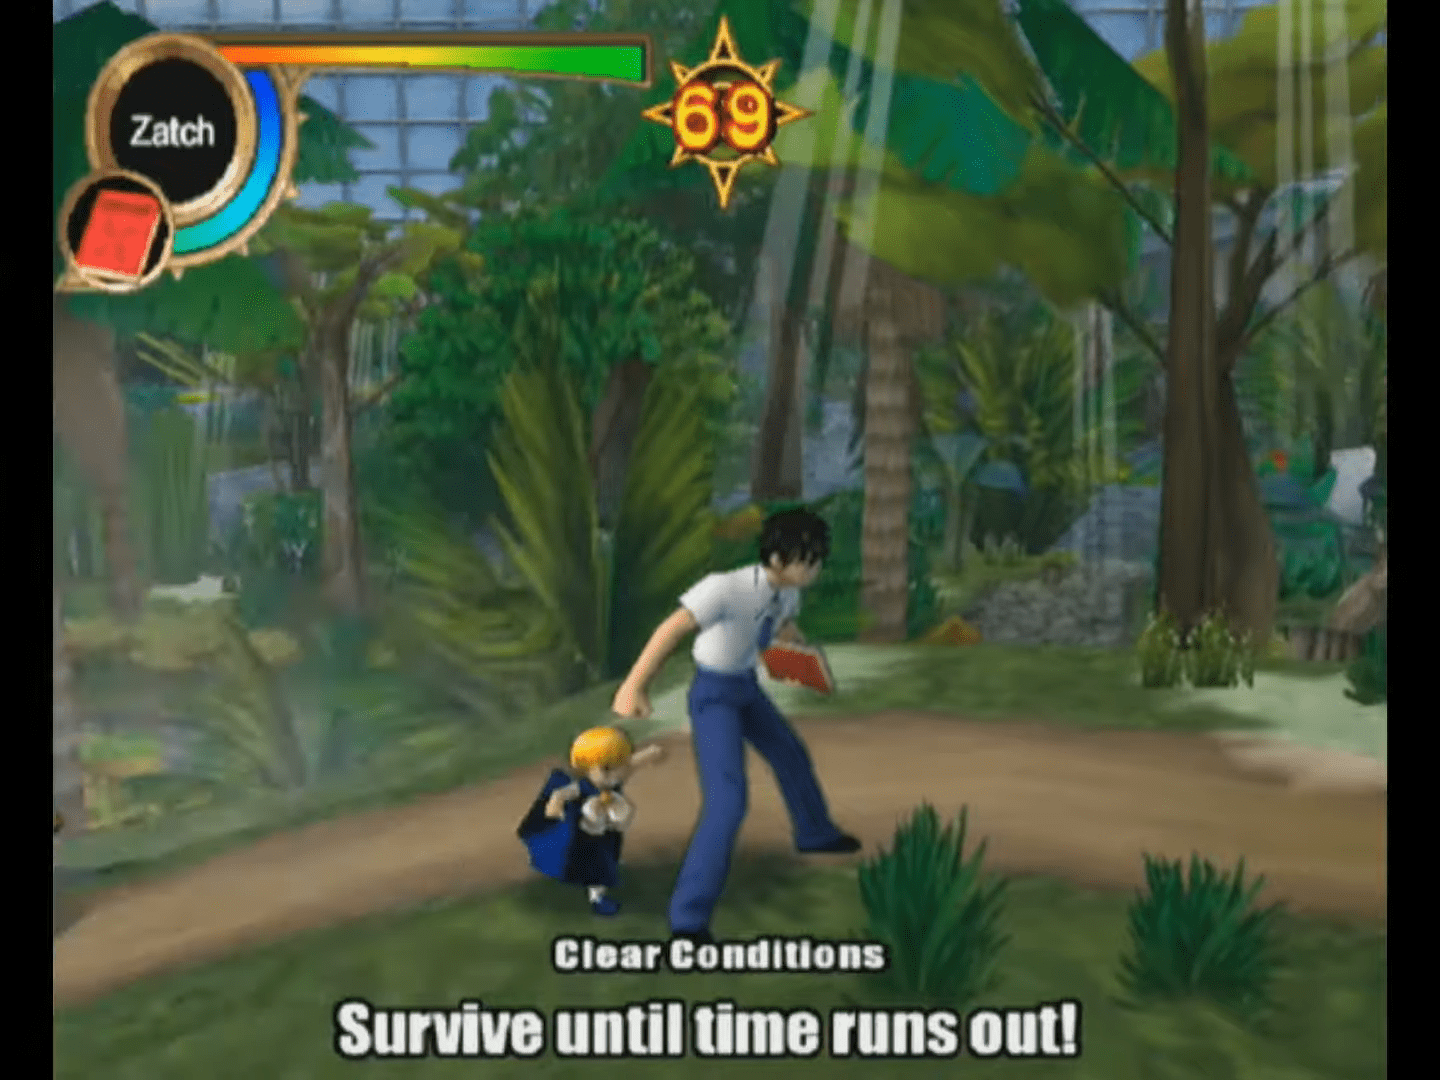 zatch bell mamodo fury pcsx2 There had been interest from China but Young p...